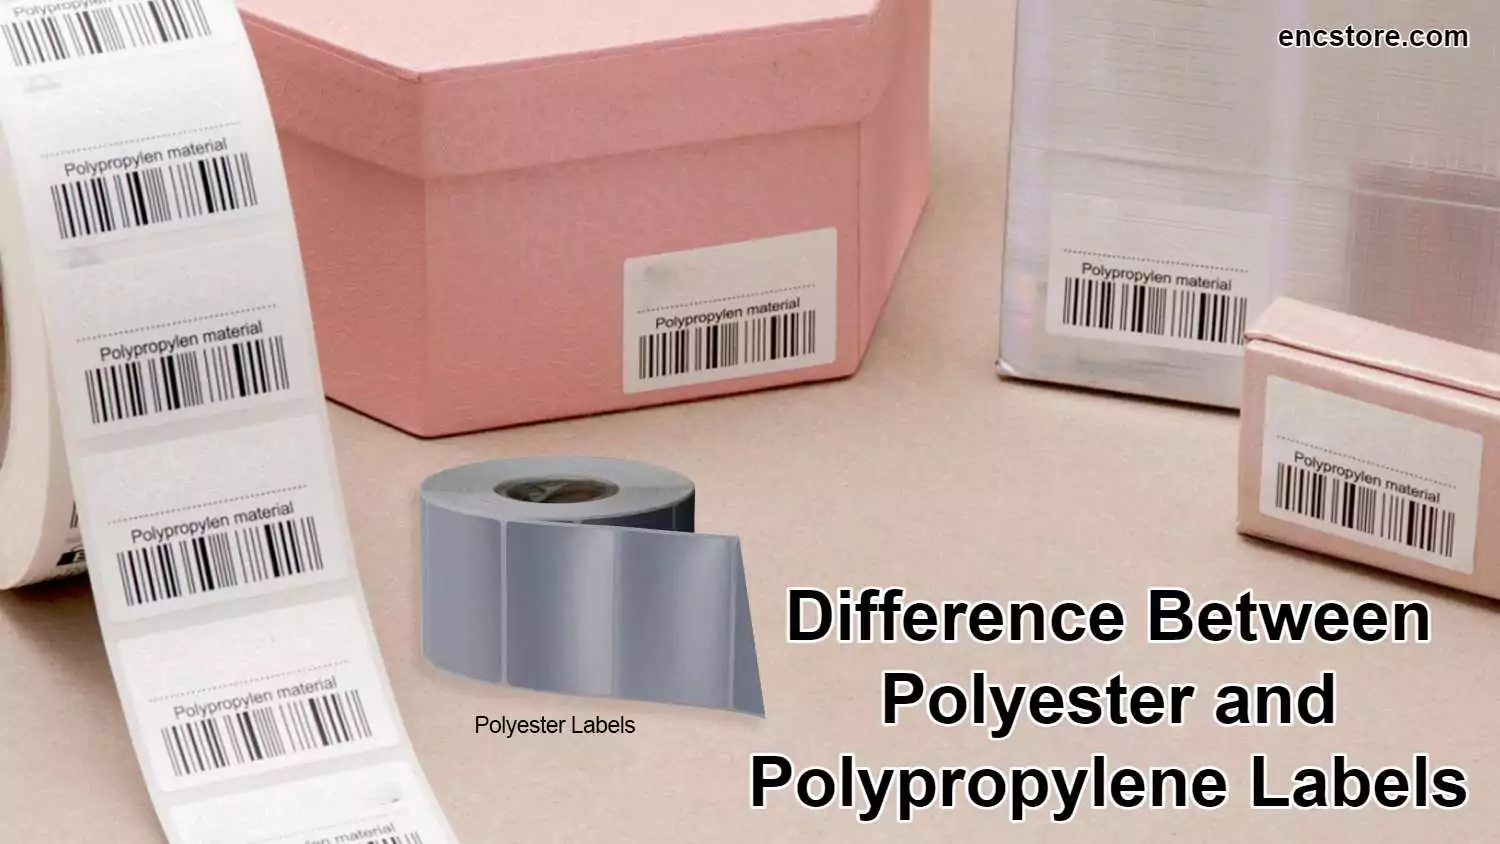 Difference Between Polyester and Polypropylene Labels